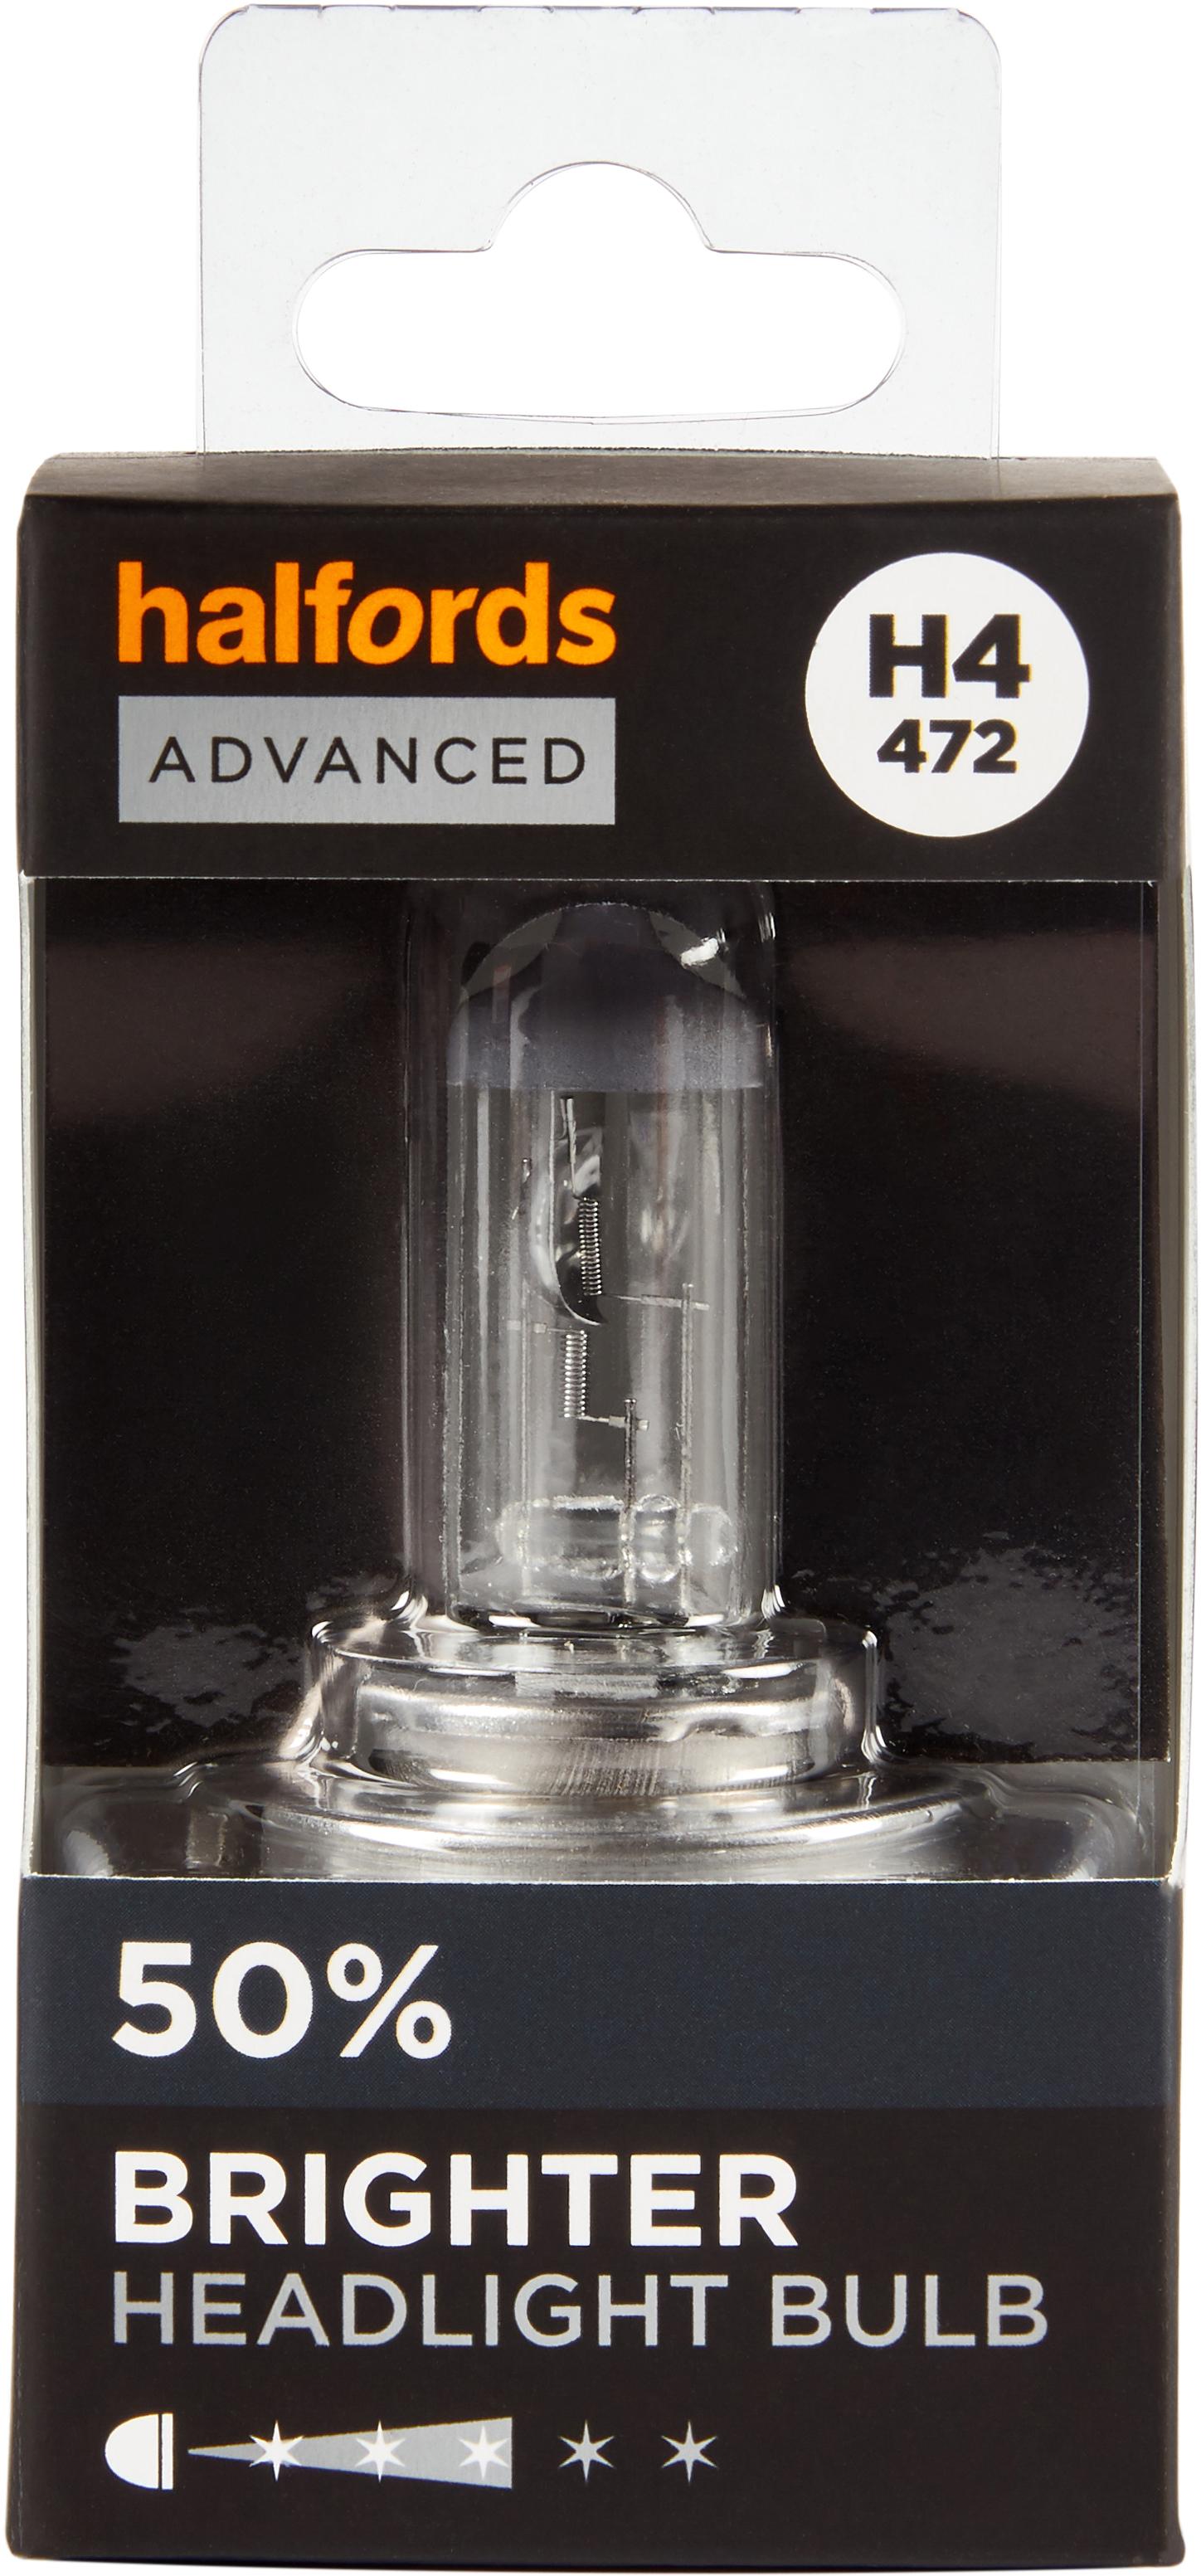 H4 472 Car Headlight Bulb Halfords Advanced Up To +50 Percent Brighter Single Pack